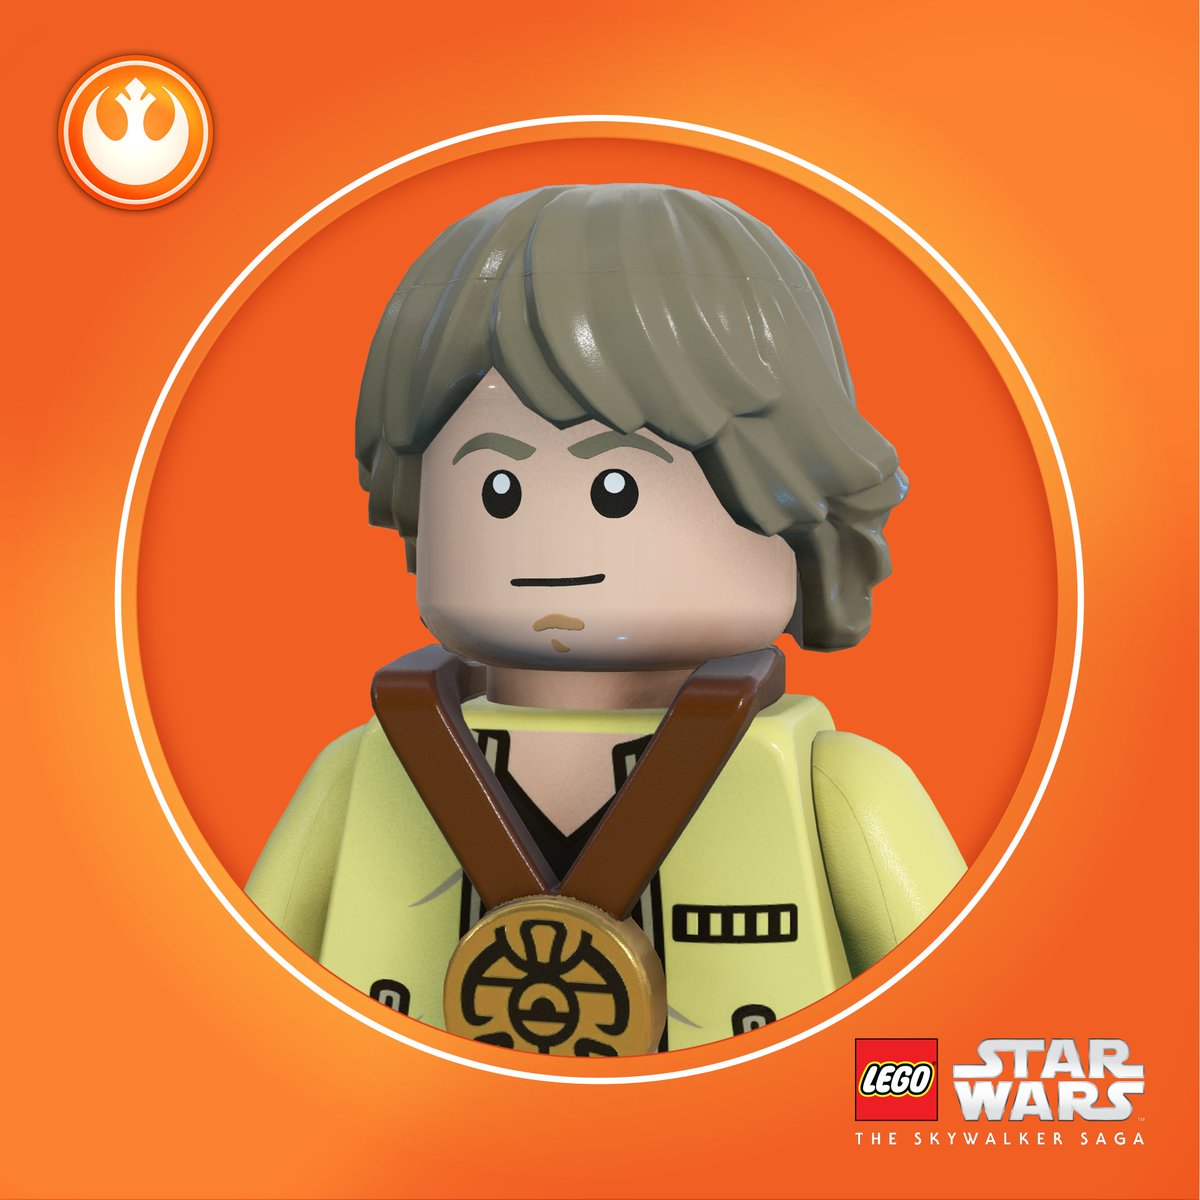 mode nuance resident Xbox on Twitter: "More LEGO Star Wars pfp's incoming. Change your profile  pic to one of 350 different @LSWGame minifig icons and stay hype for LEGO  Star Wars: The Skywalker Saga: https://t.co/VIAECVZB2j" /